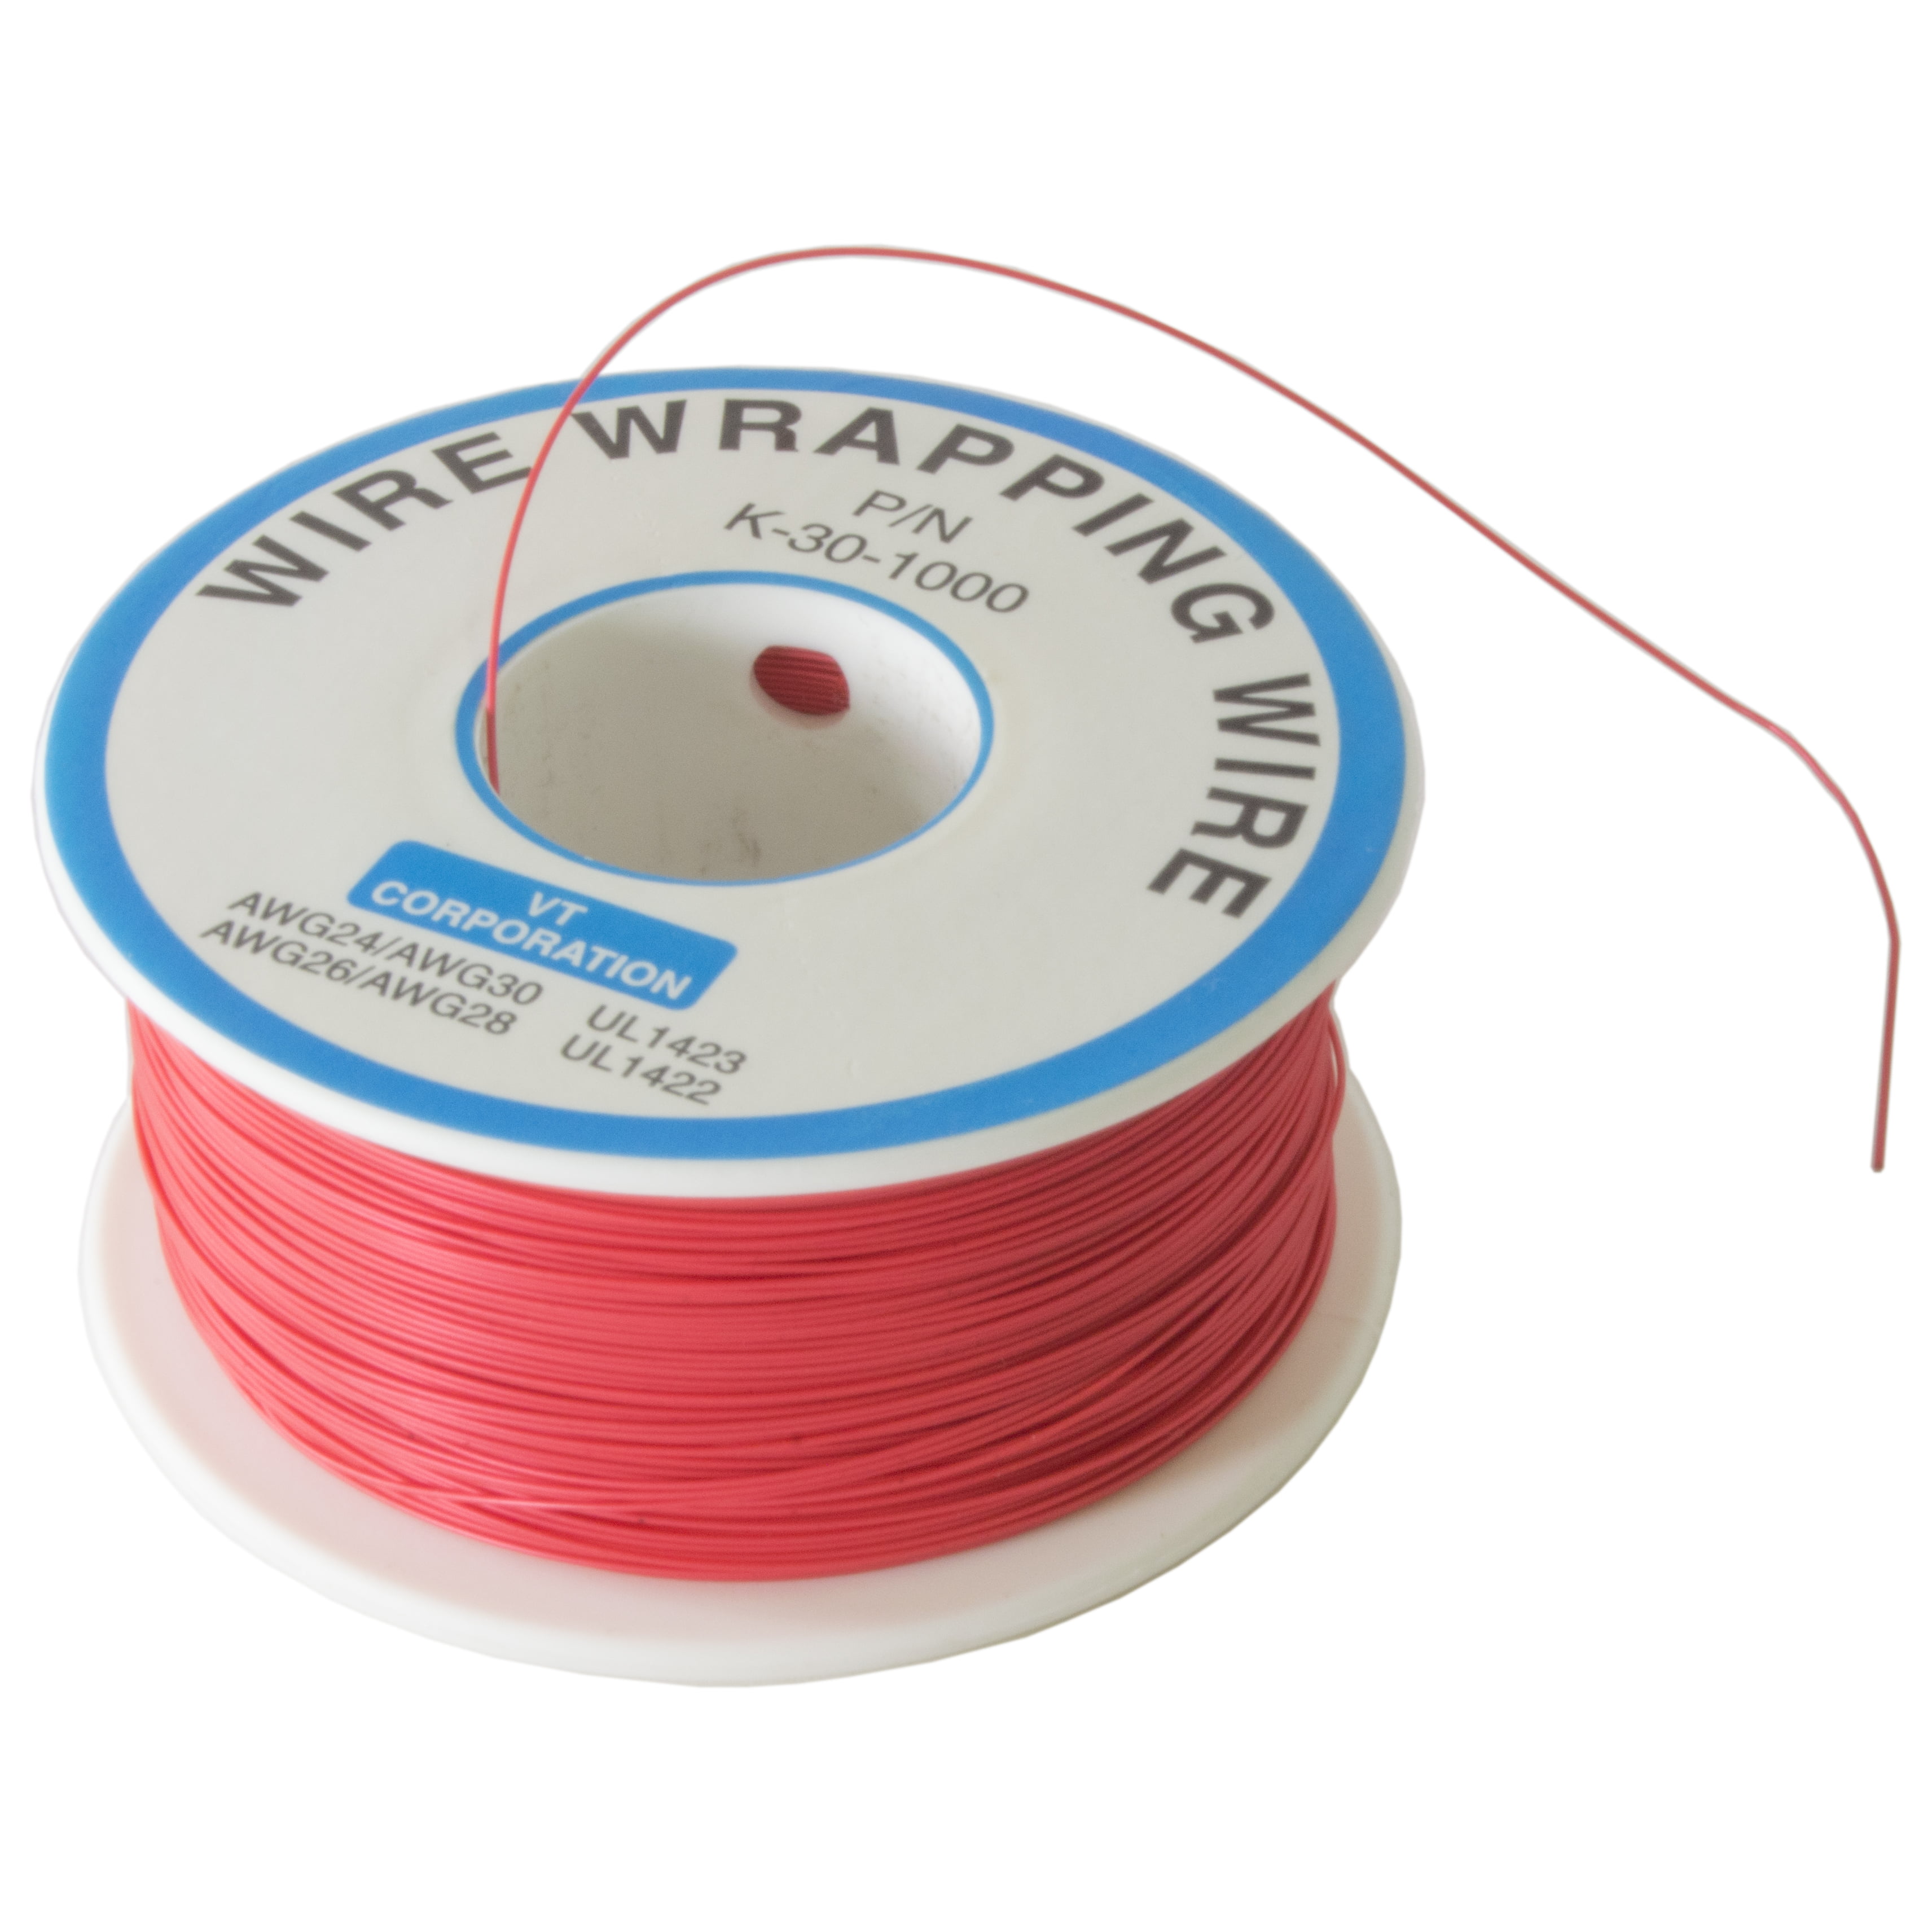 White Kynar wrapping wire 30awg circuit modding 5M 